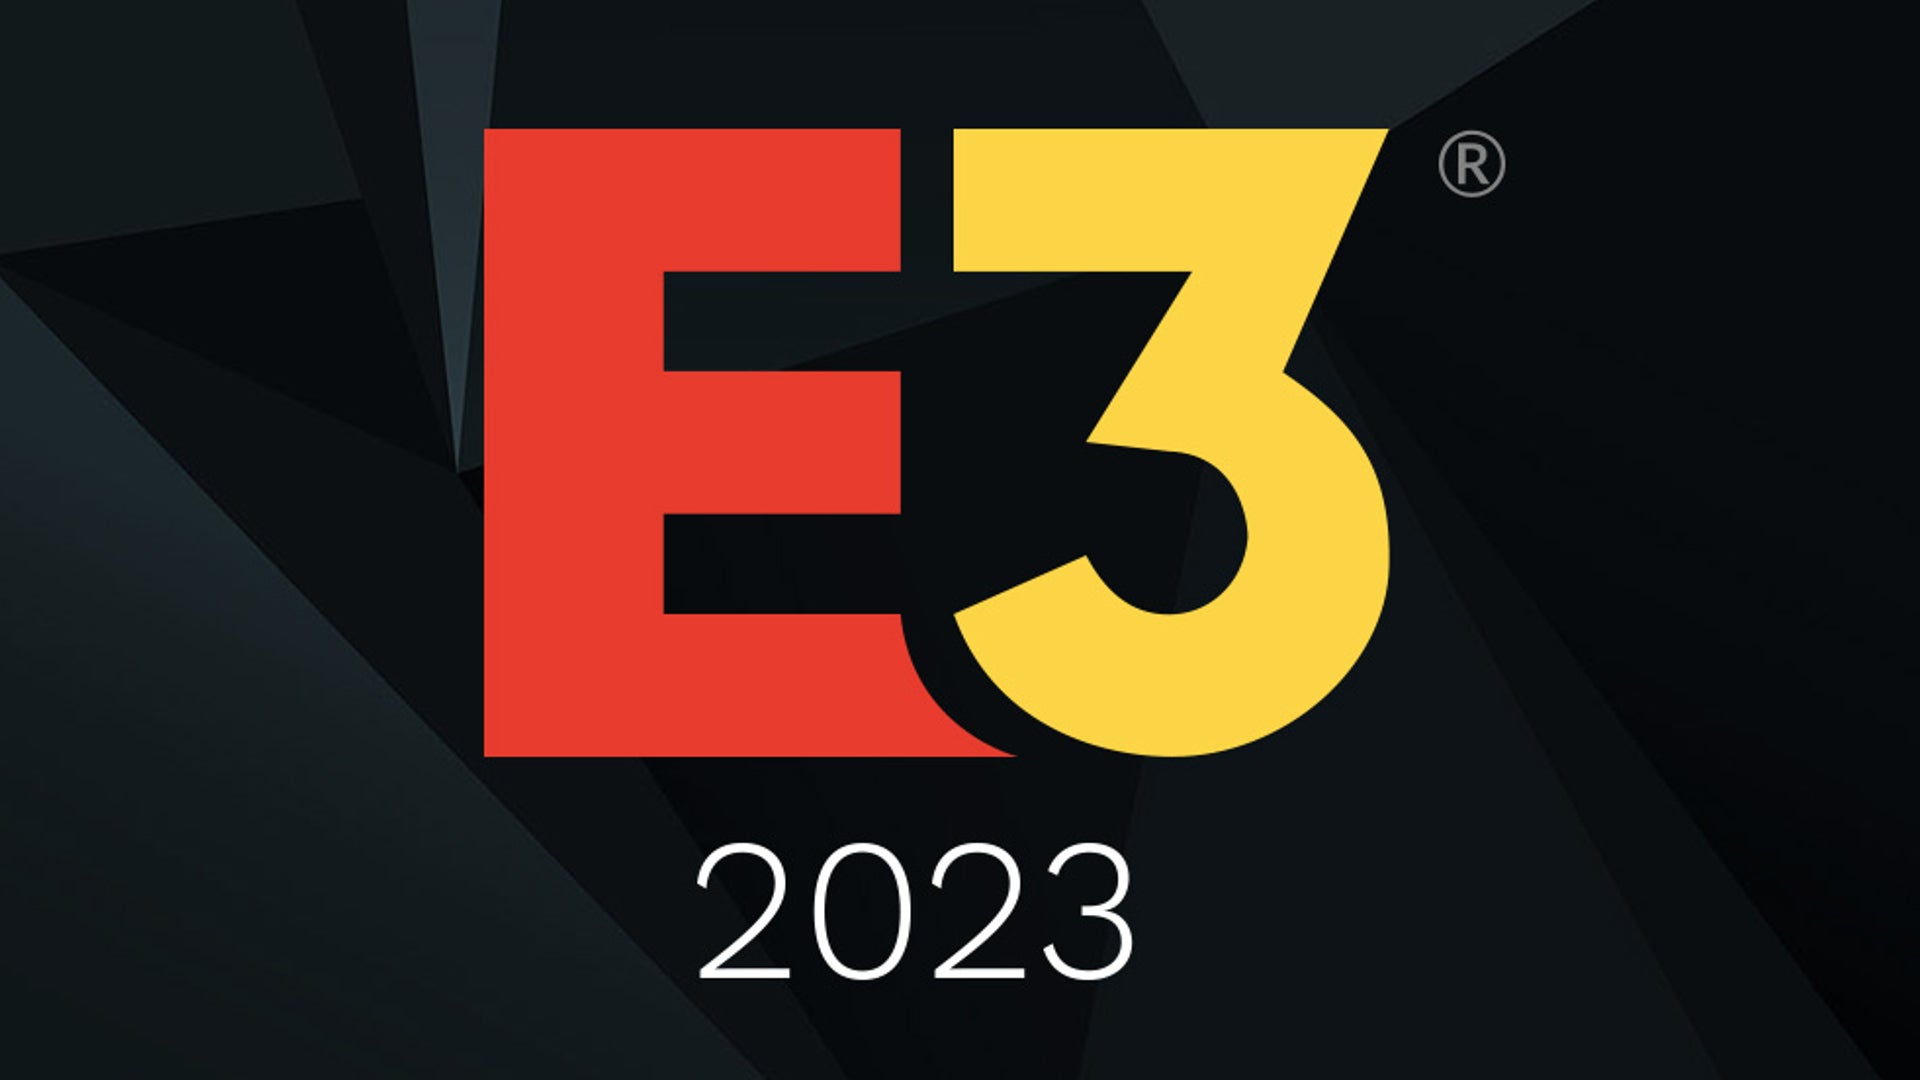 E3 is back in a new form in June 2023, and here are the dates